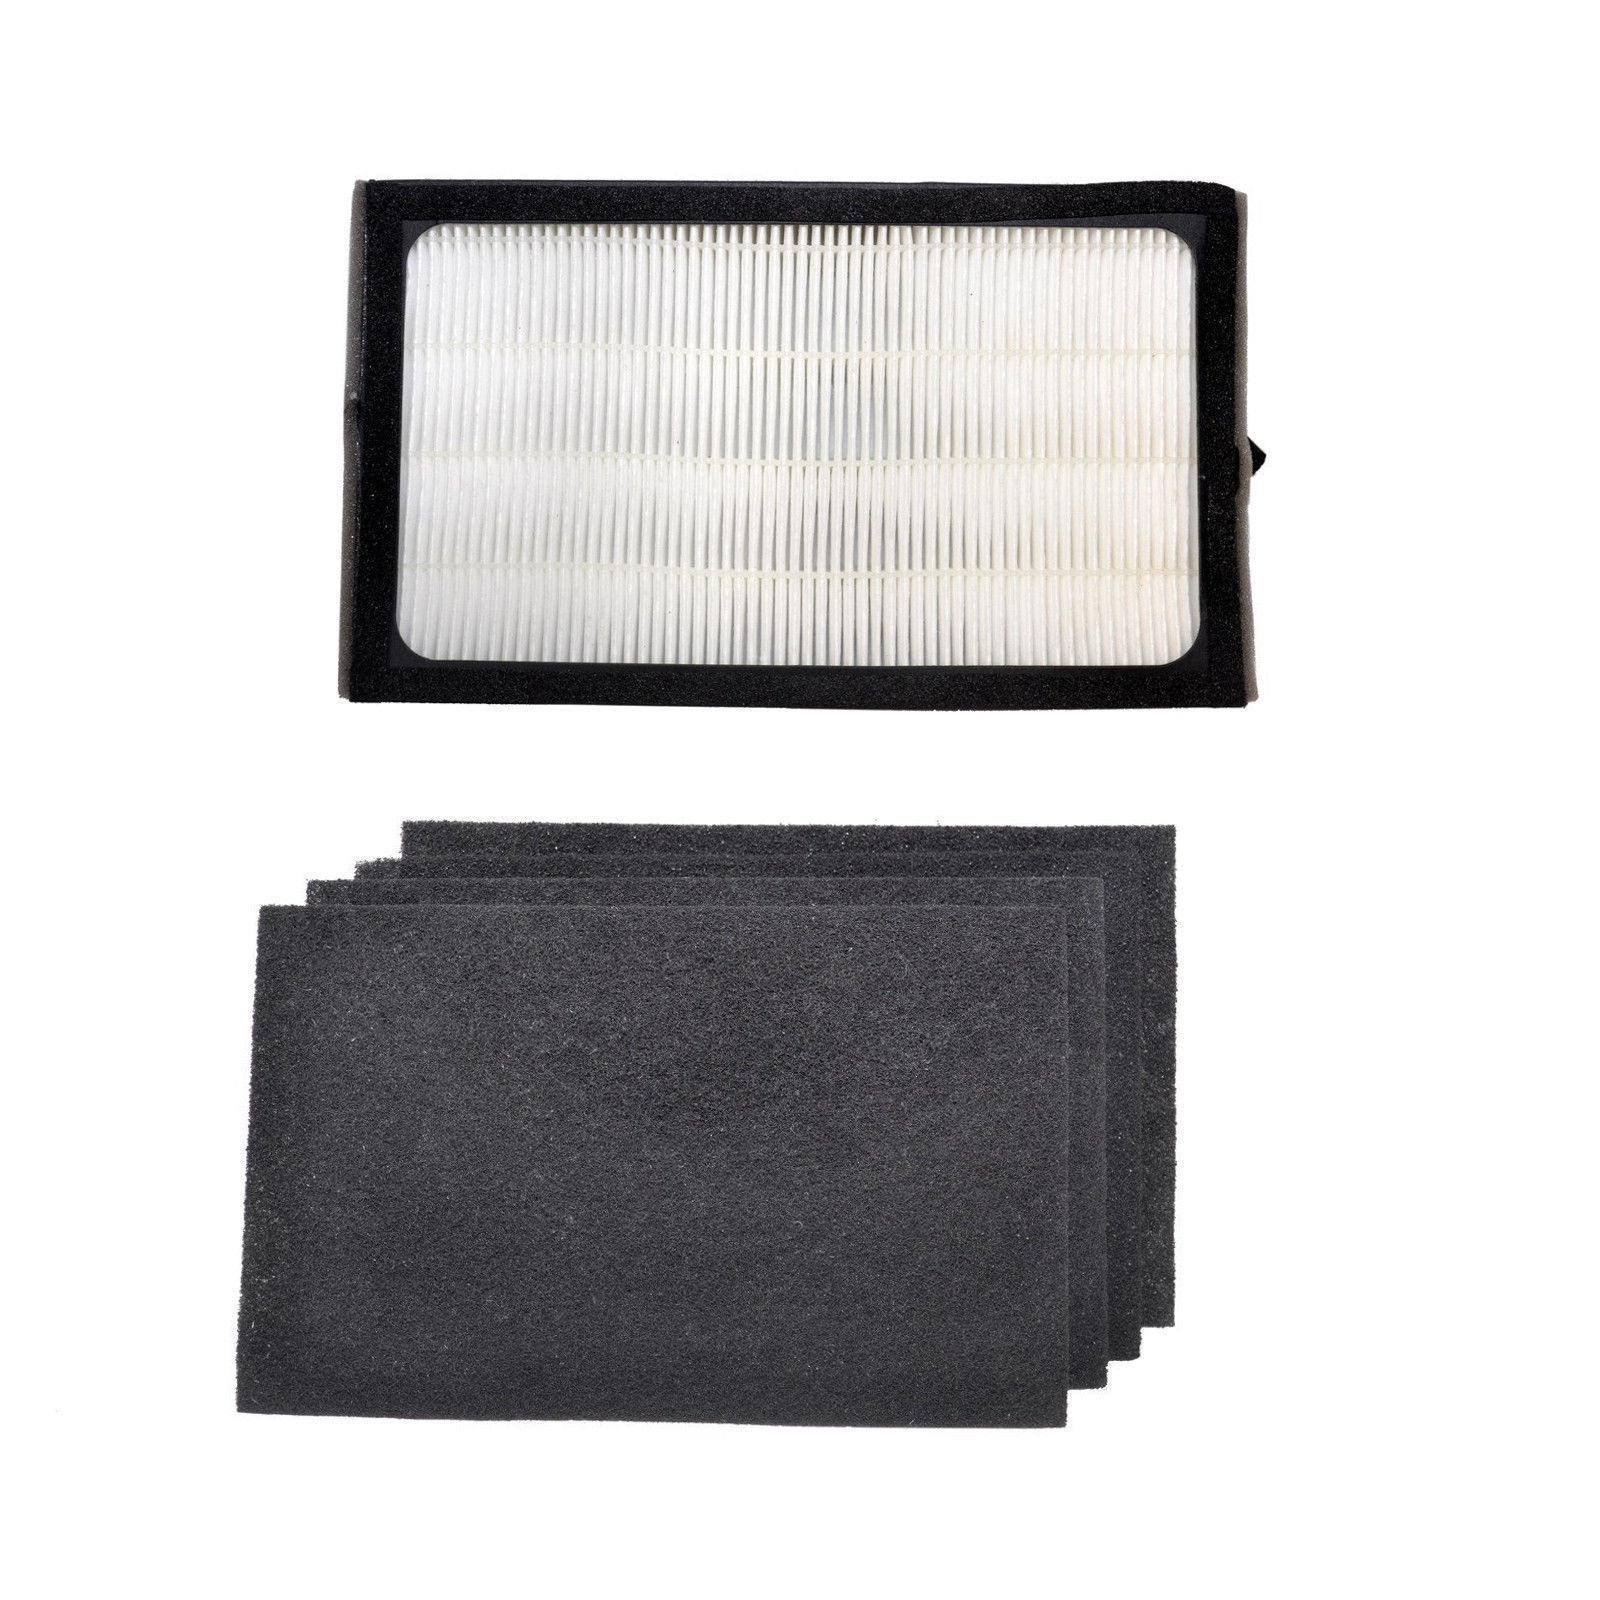 Primary image for HQRP Filter E + 4x Carbon filter for GermGuardian AC4100 AC4150 FLT4100 FLT11CB4